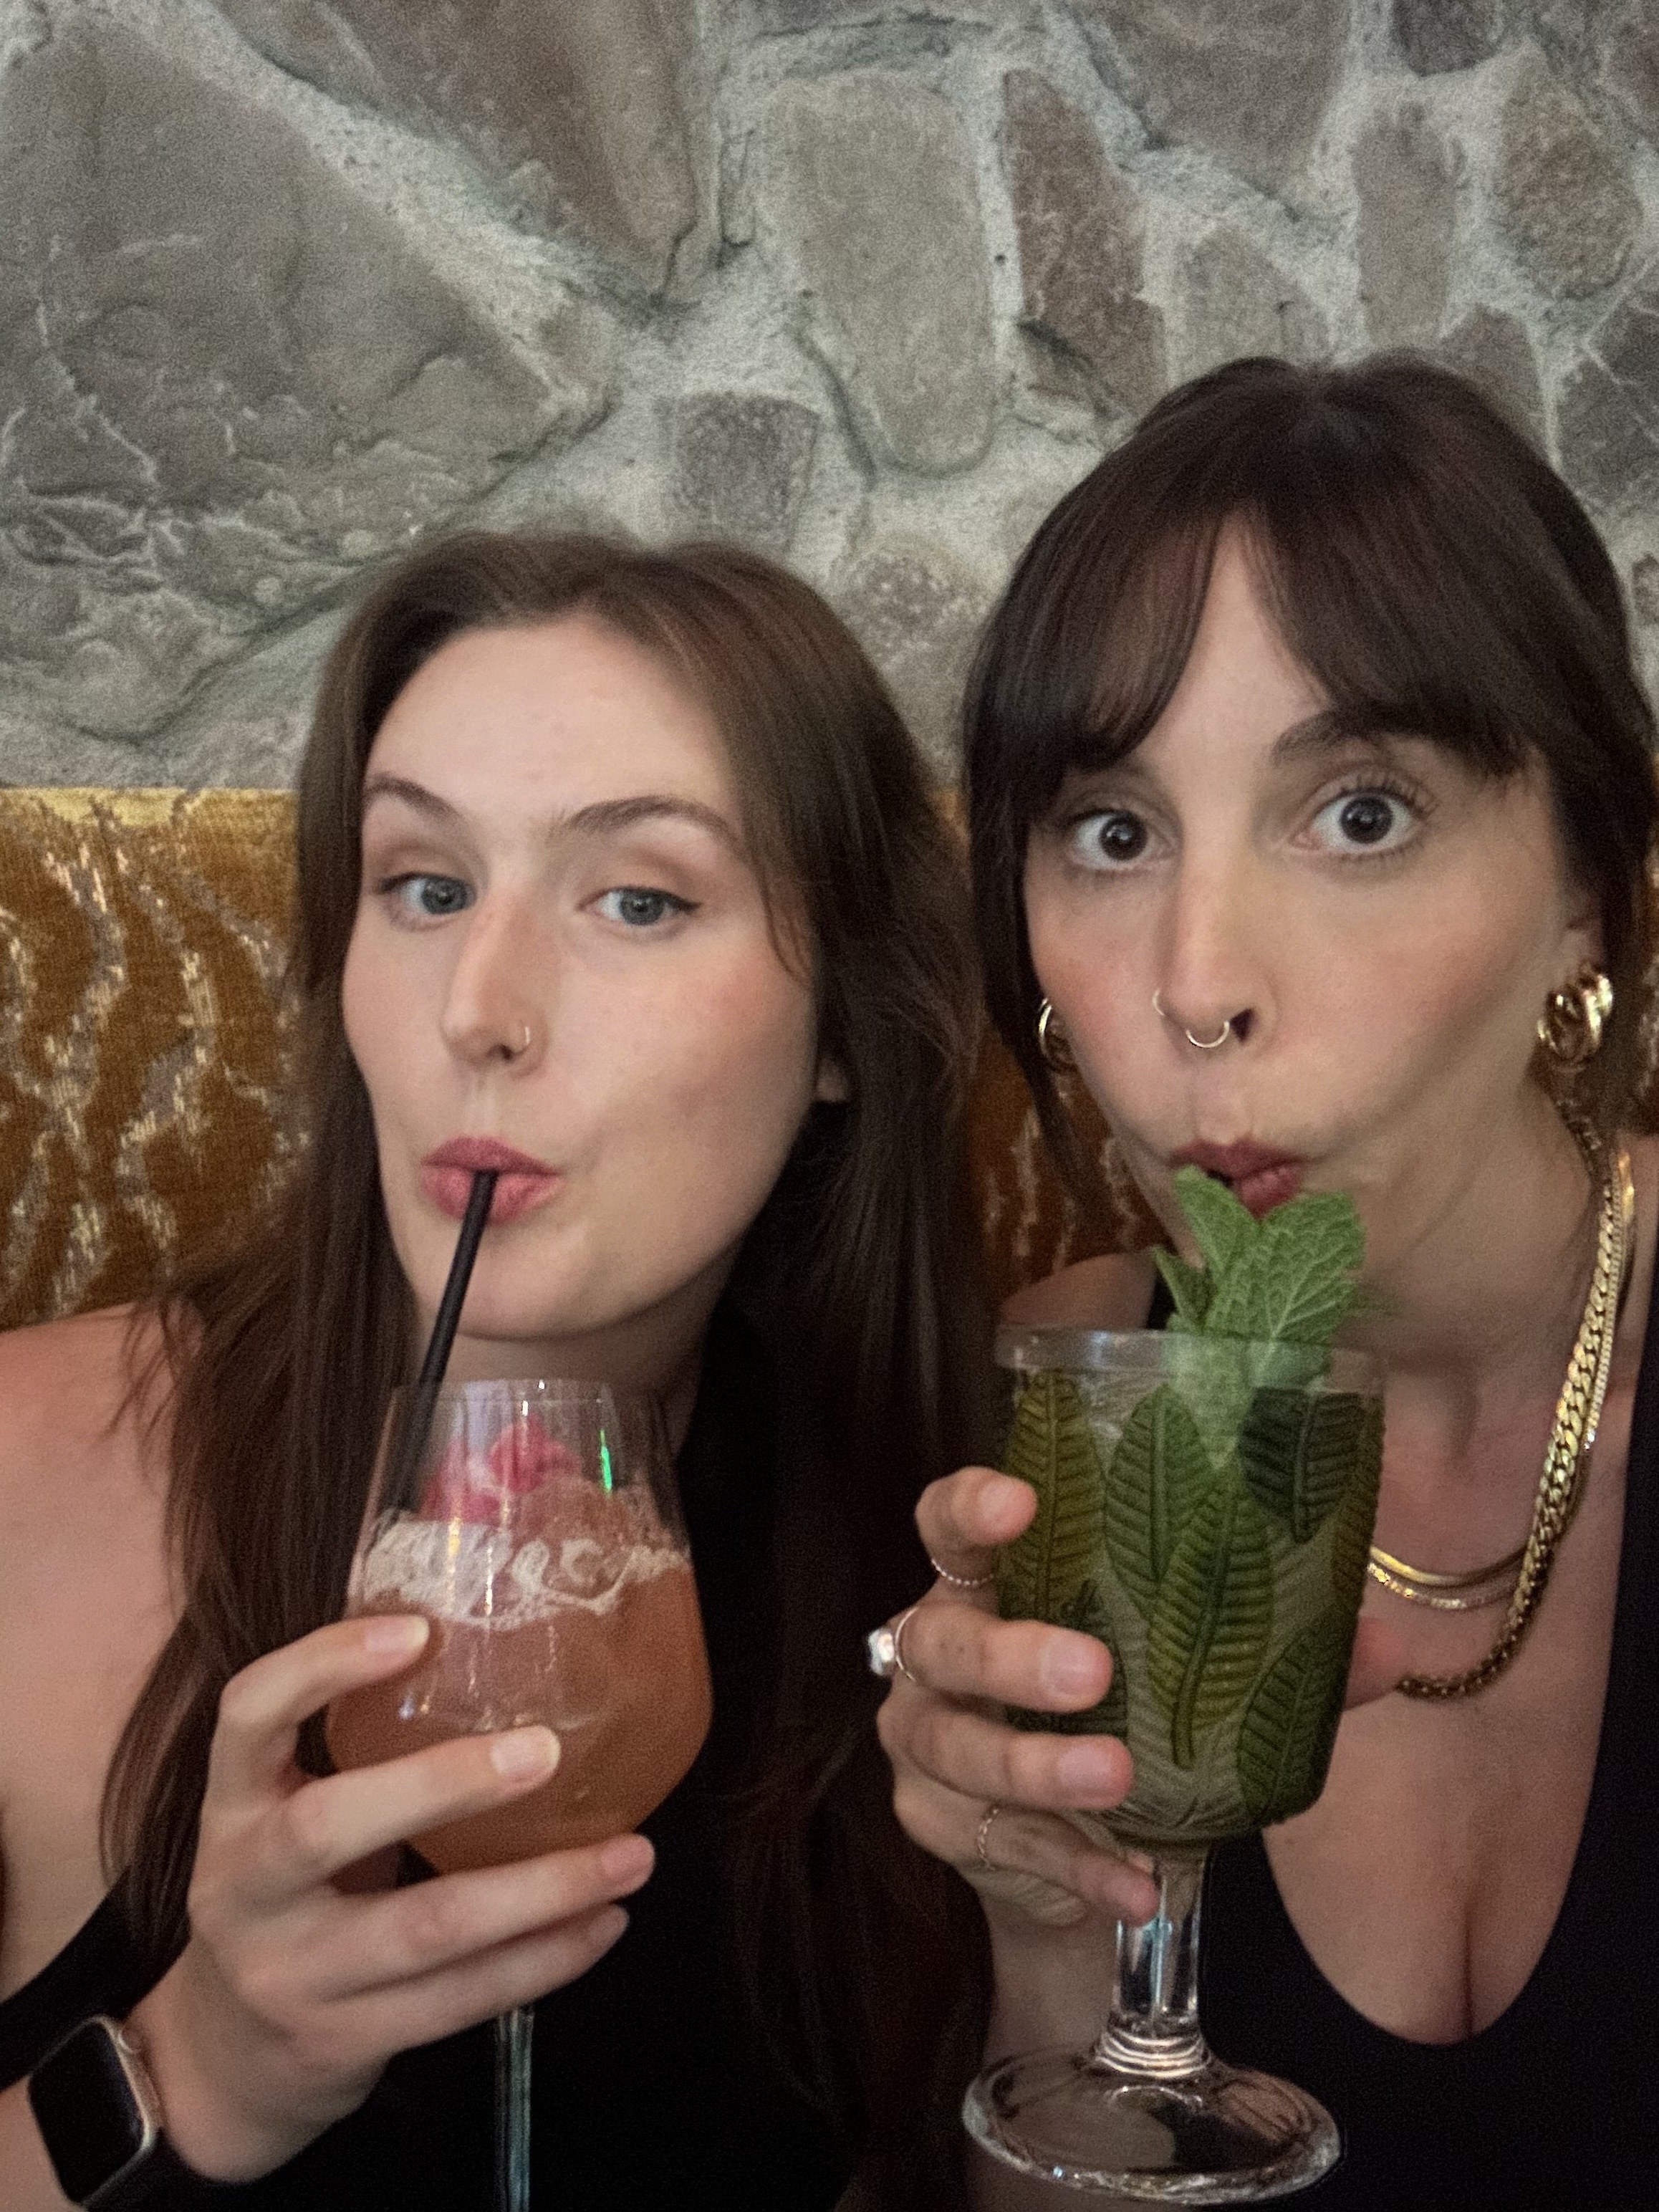 Shelby and Lara in a selfie drinking their cocktails